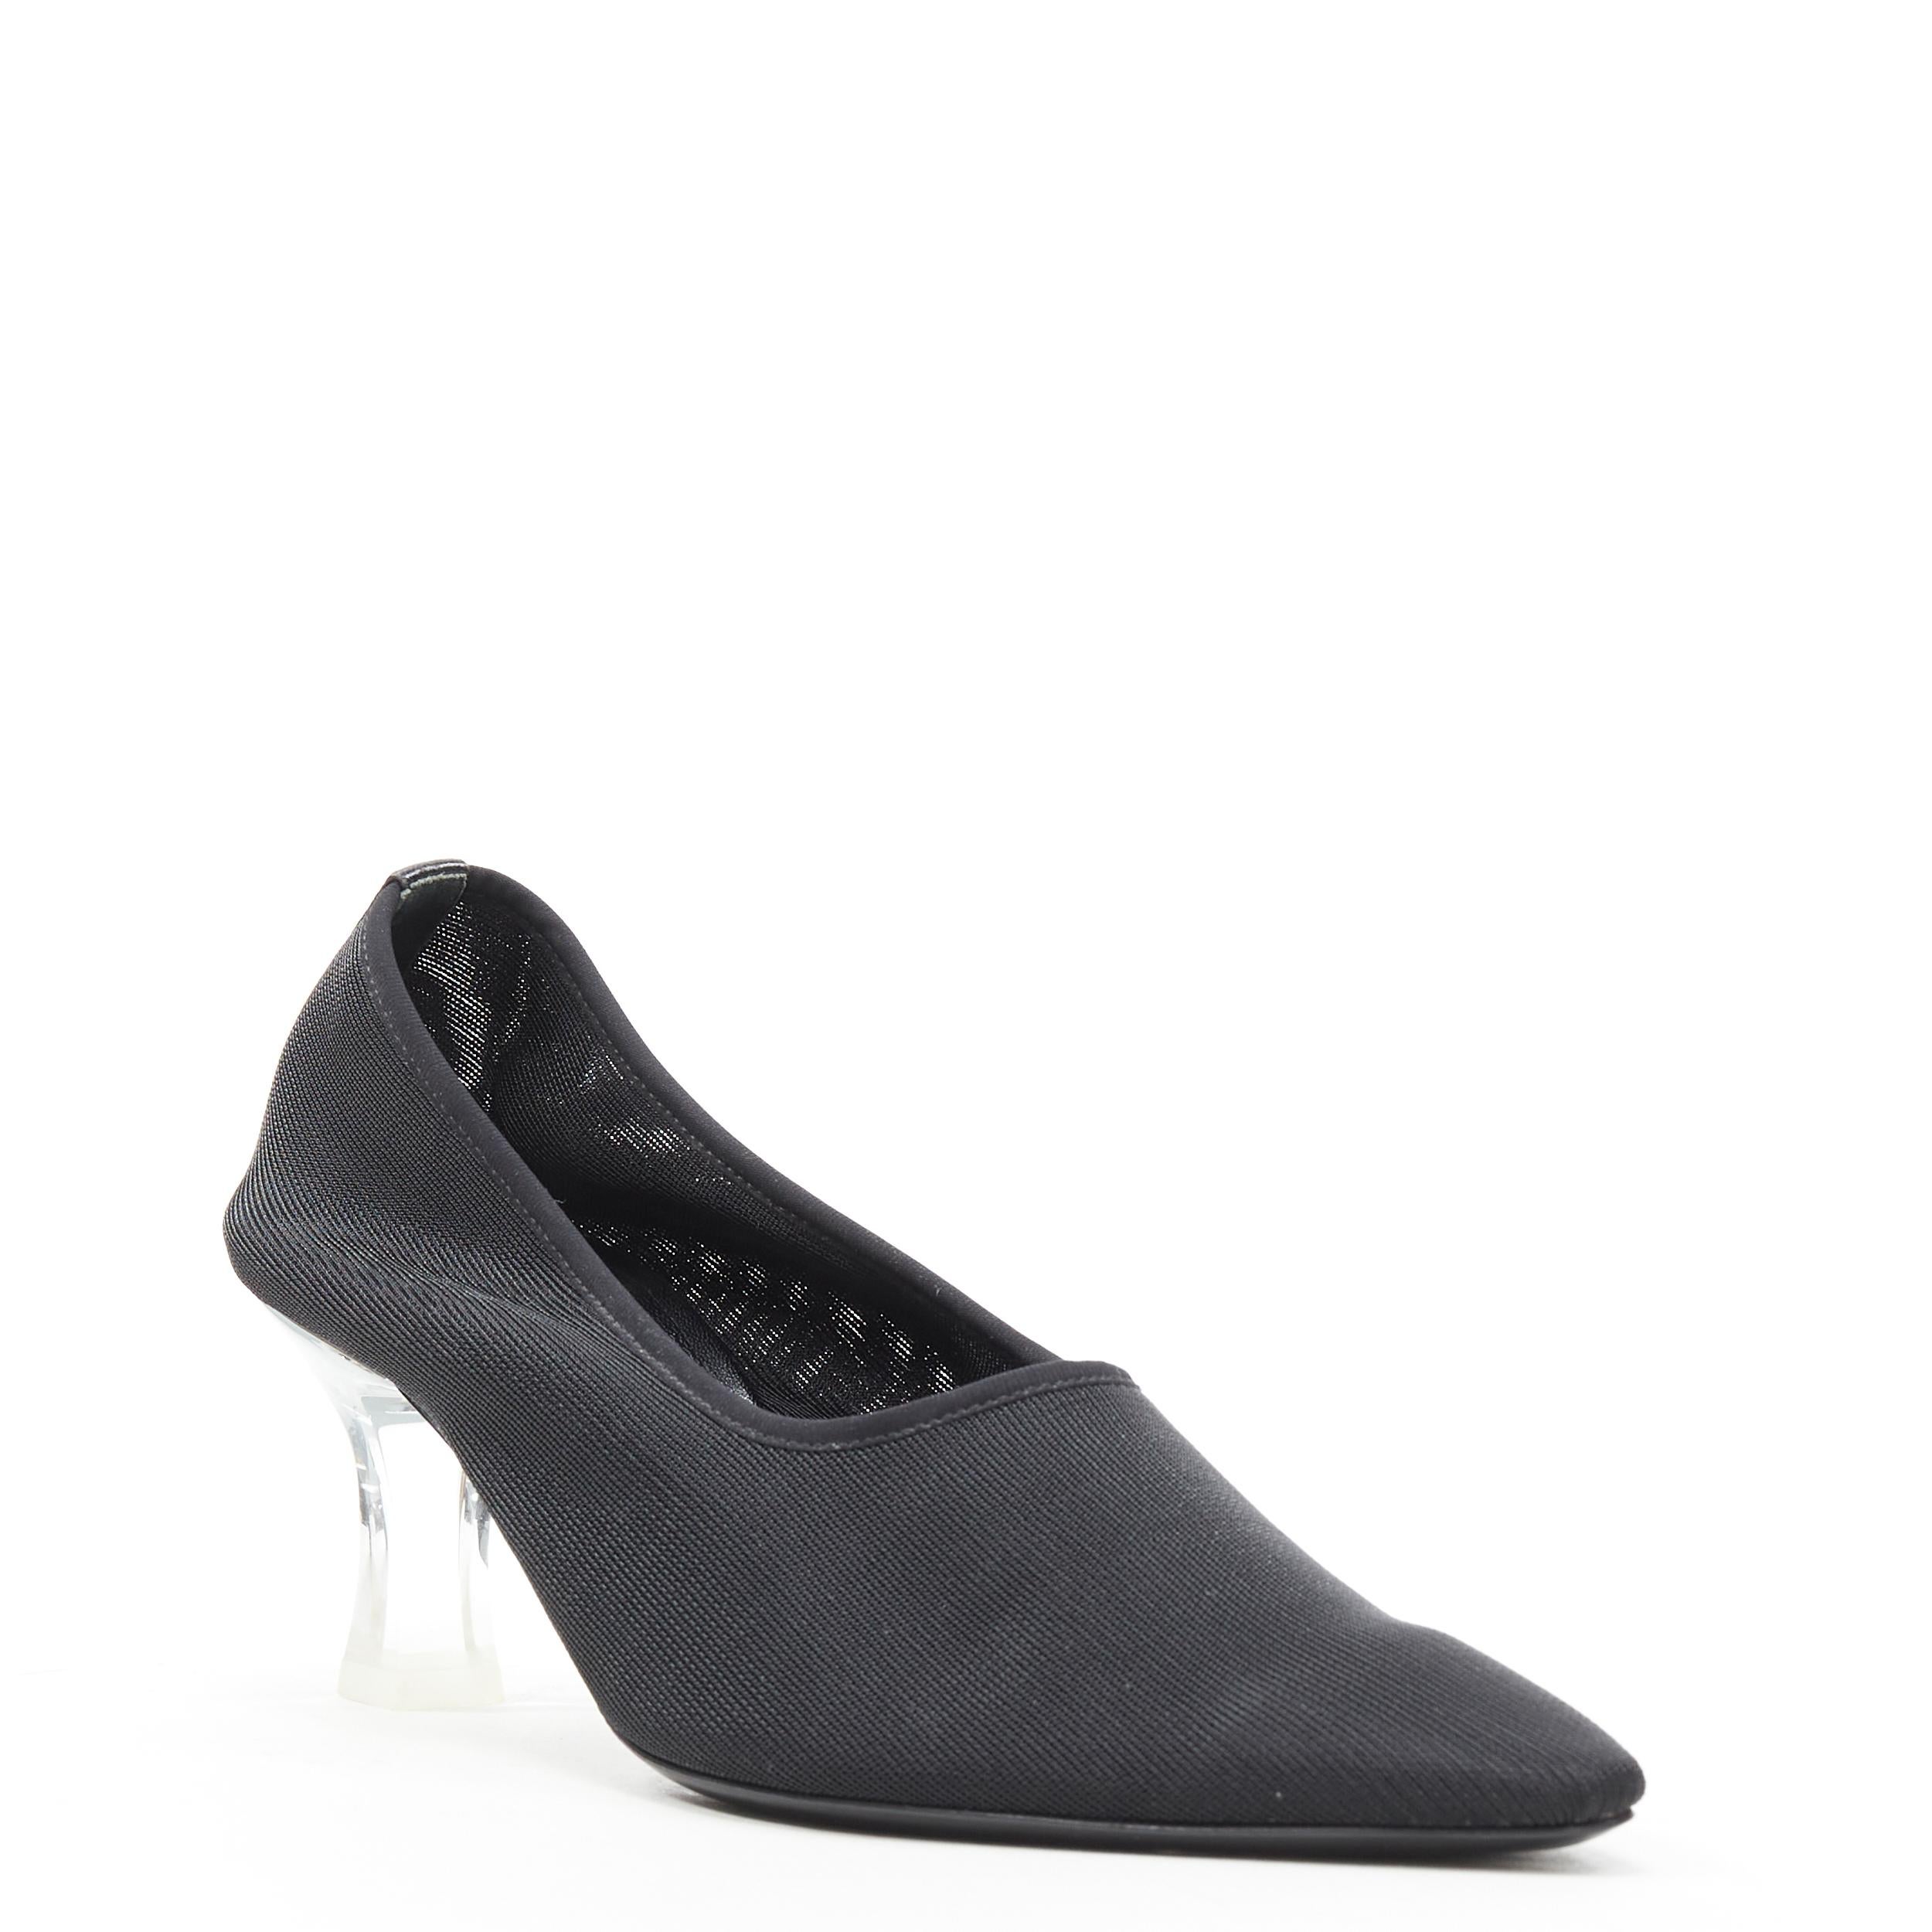 new THE ROW black sock mesh lucite PVC mid heel pointy pump EU36 
Reference: TGAS/B01225 
Brand: The Row 
Model: Sock Pump Lucite Heel 
Material: Mesh 
Color: Black 
Pattern: solid 
Extra Detail: Stretch nylon sock fit. Pointed toe. Lucite clear